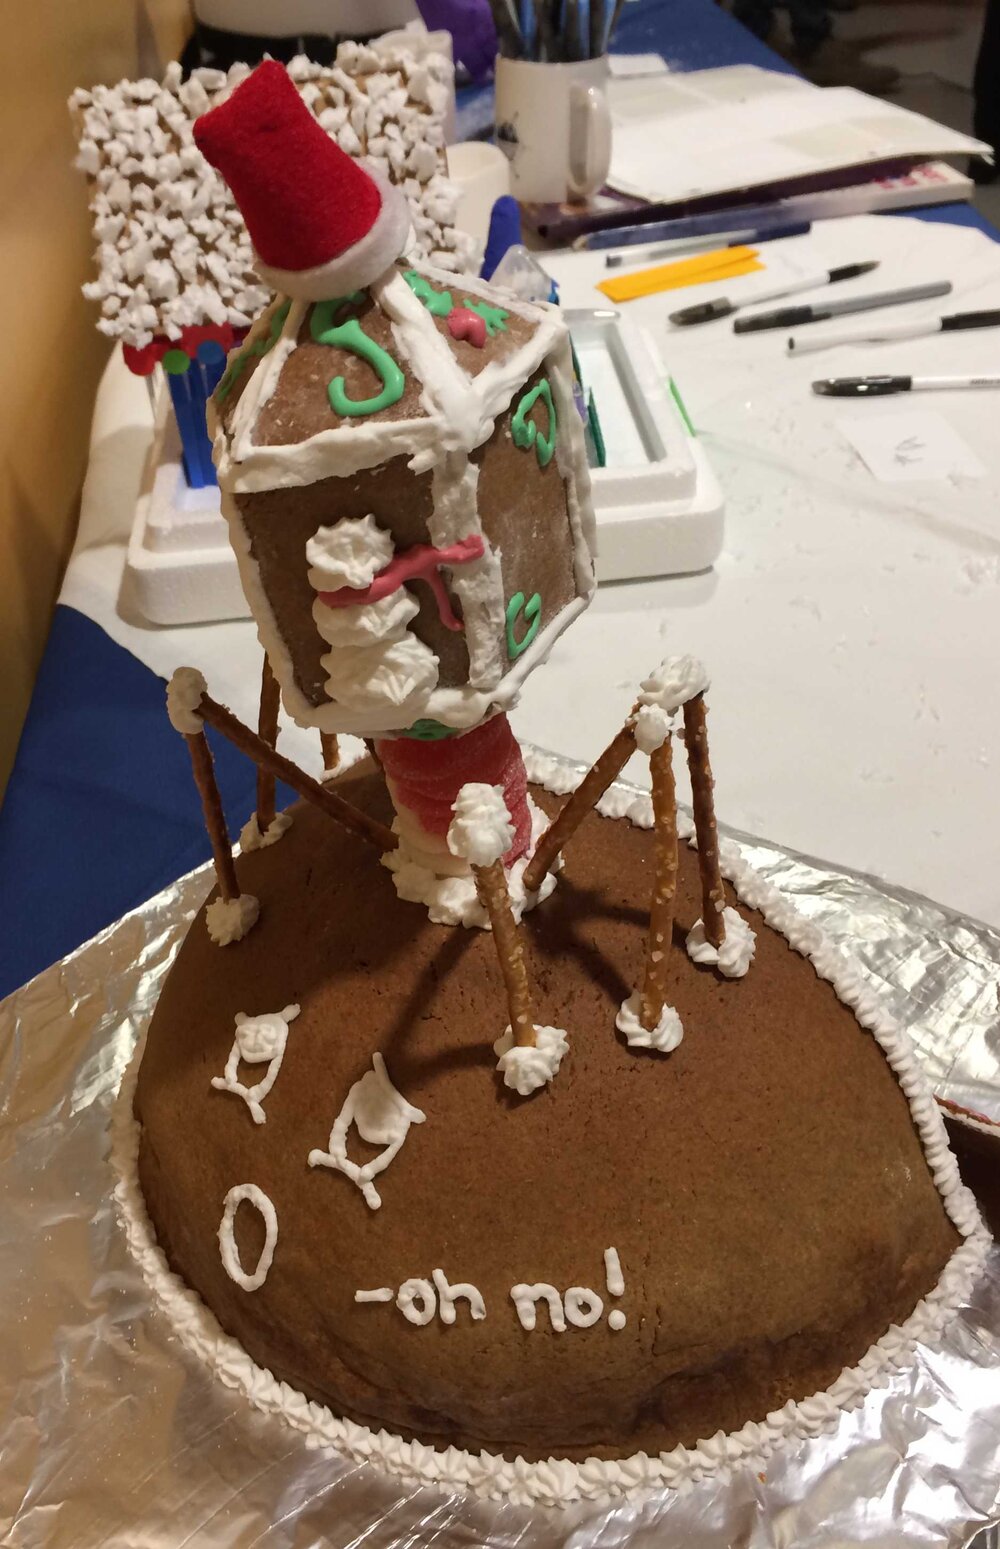  The back of the domed gingerbread “cell” with geometric “phage” on top - drawn in white frosting are two eyes and a round mouth, saying “oh no!” 